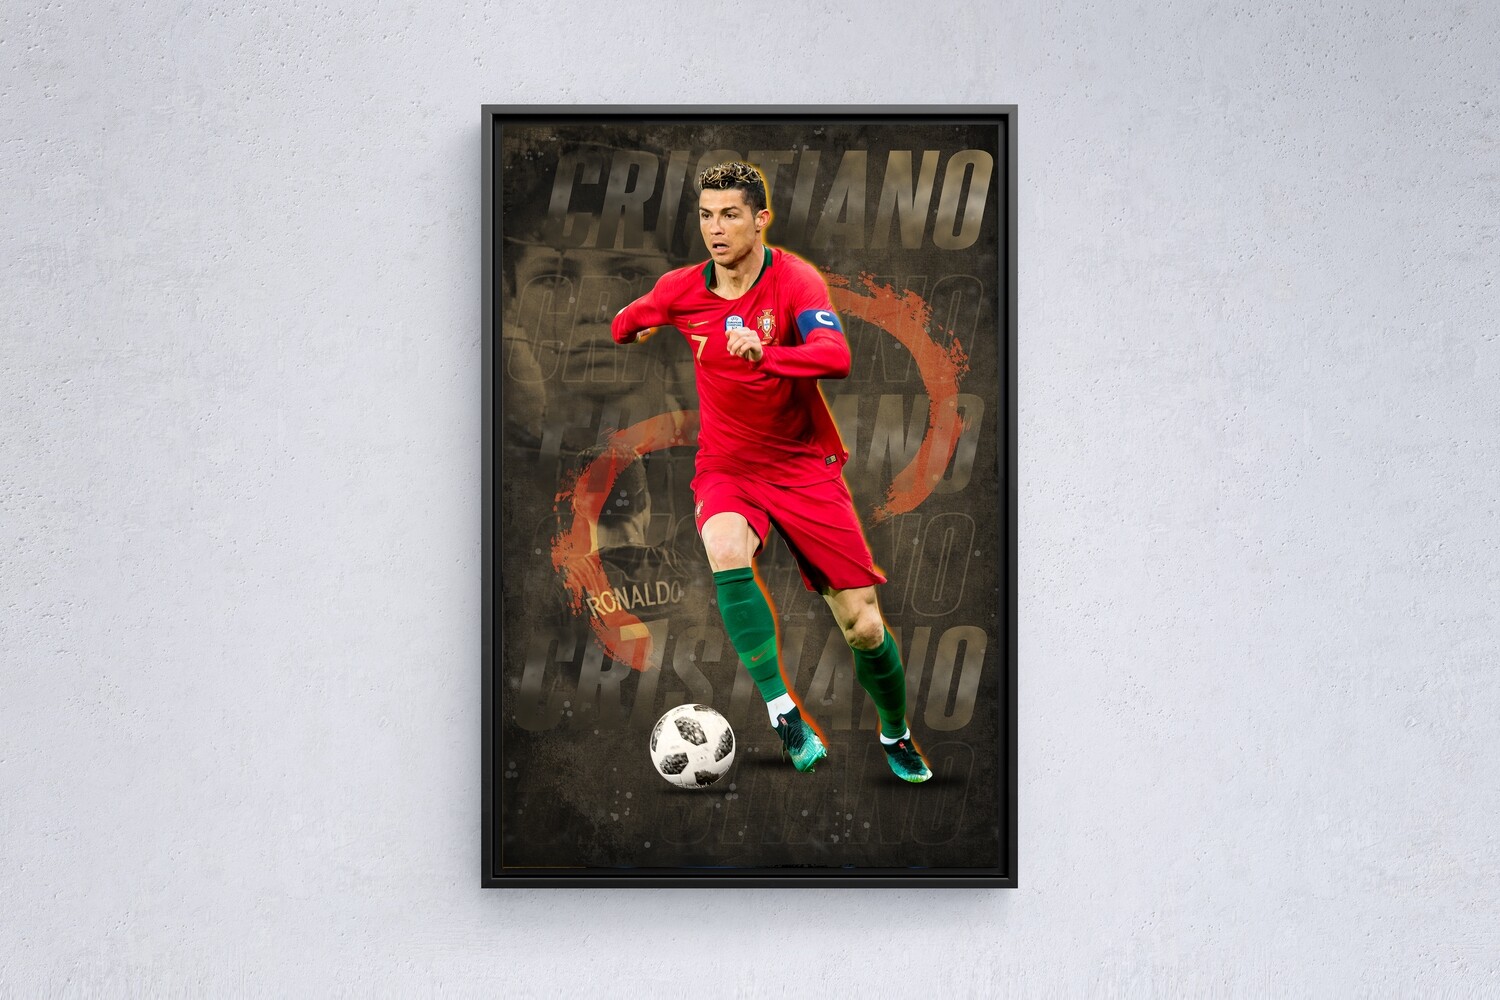 Cristiano Ronaldo Painting-Framed Sport Wallart - CR7 - Picture Printed on Acrylic Glass - Framed and Ready To Hang